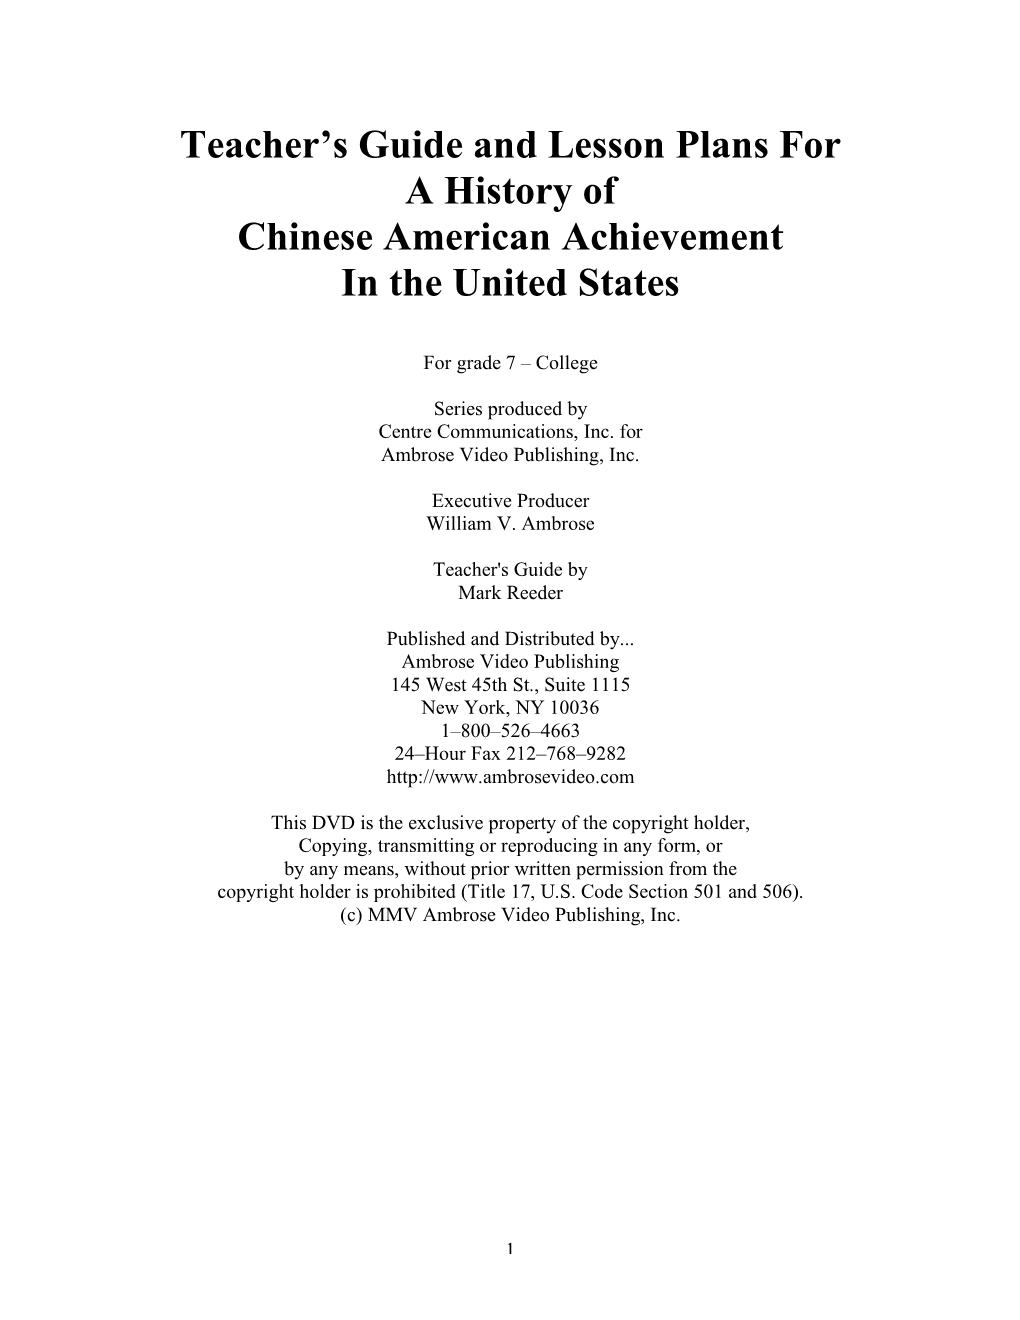 Teacher's Guide and Lesson Plans for a History of Chinese American